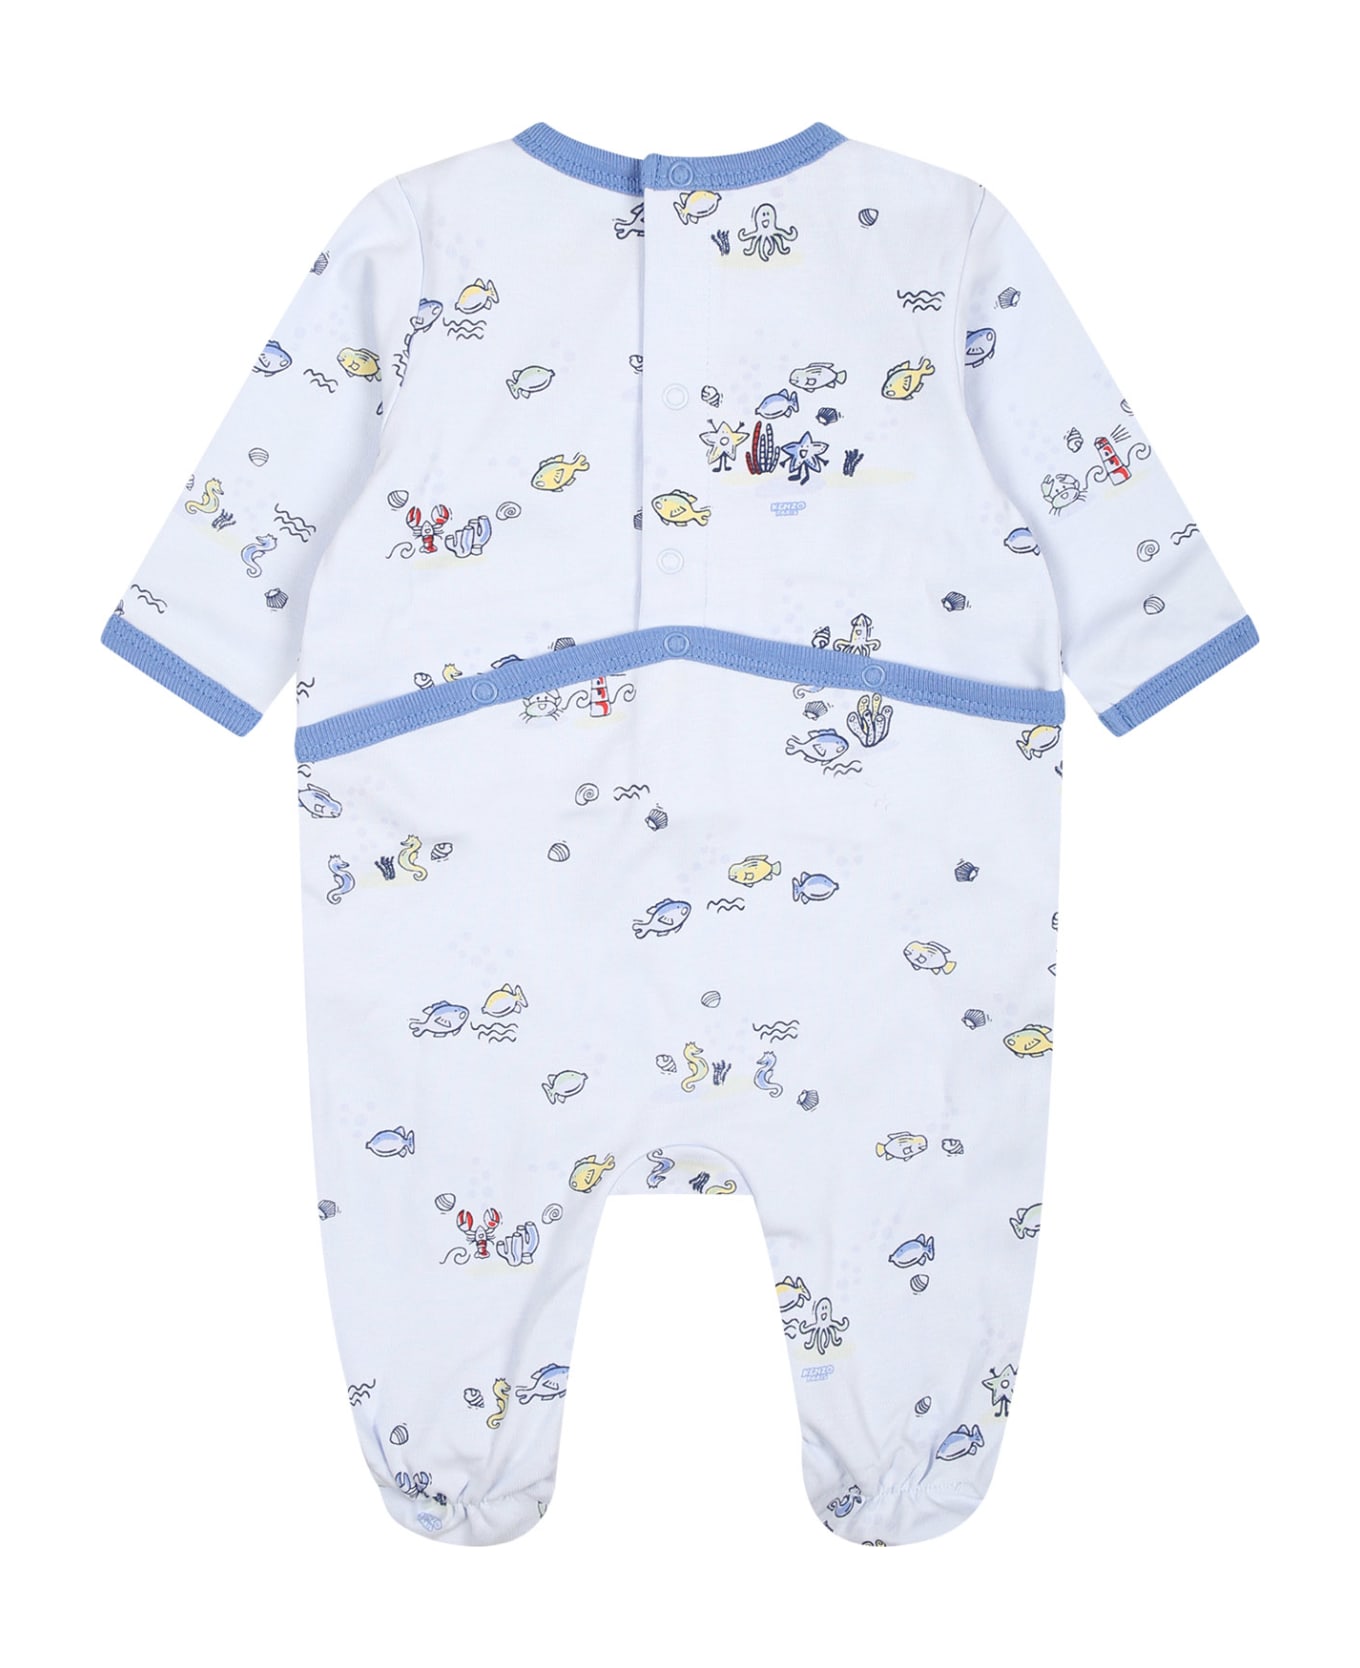 Kenzo Kids Light Blue Set For Baby Boy With Print And Logo - Light Blue